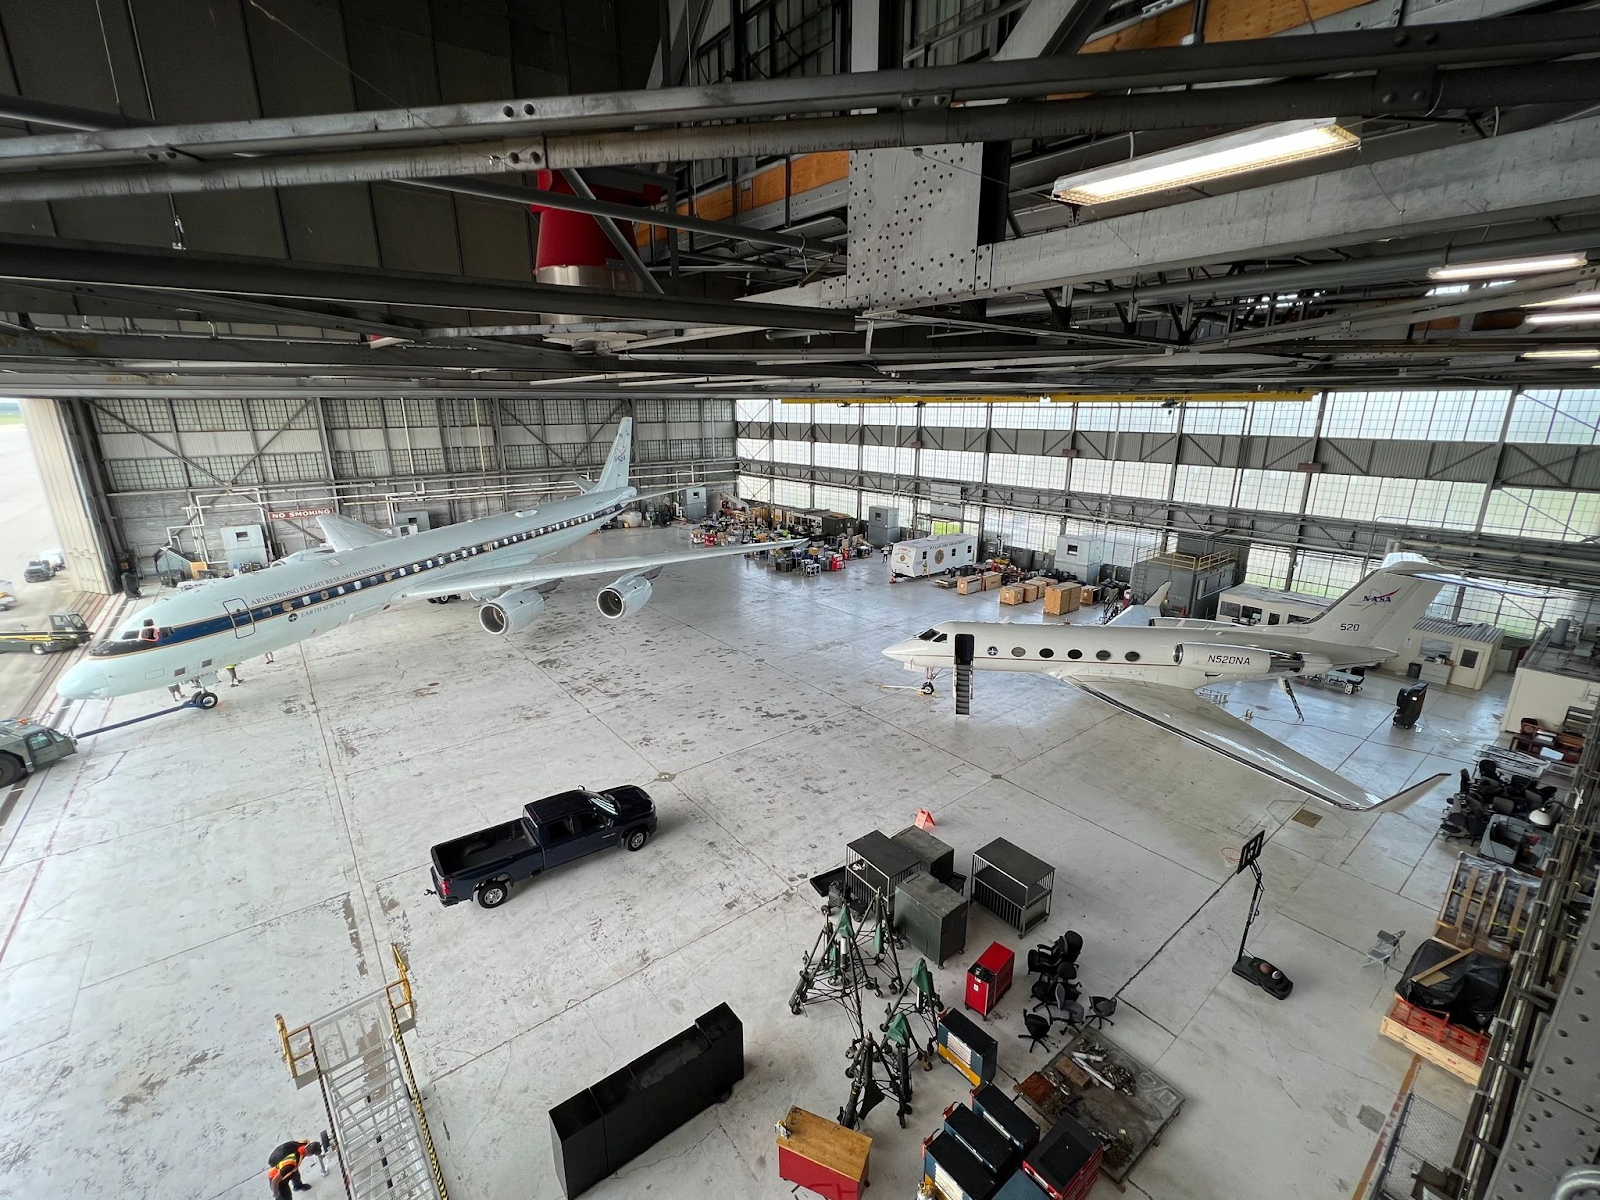 Two research planes are parked in a spacious aircraft hangar lined with cargo. Several people, a black pickup truck, and even a basketball hoop – for recreation during down time – are also visible.